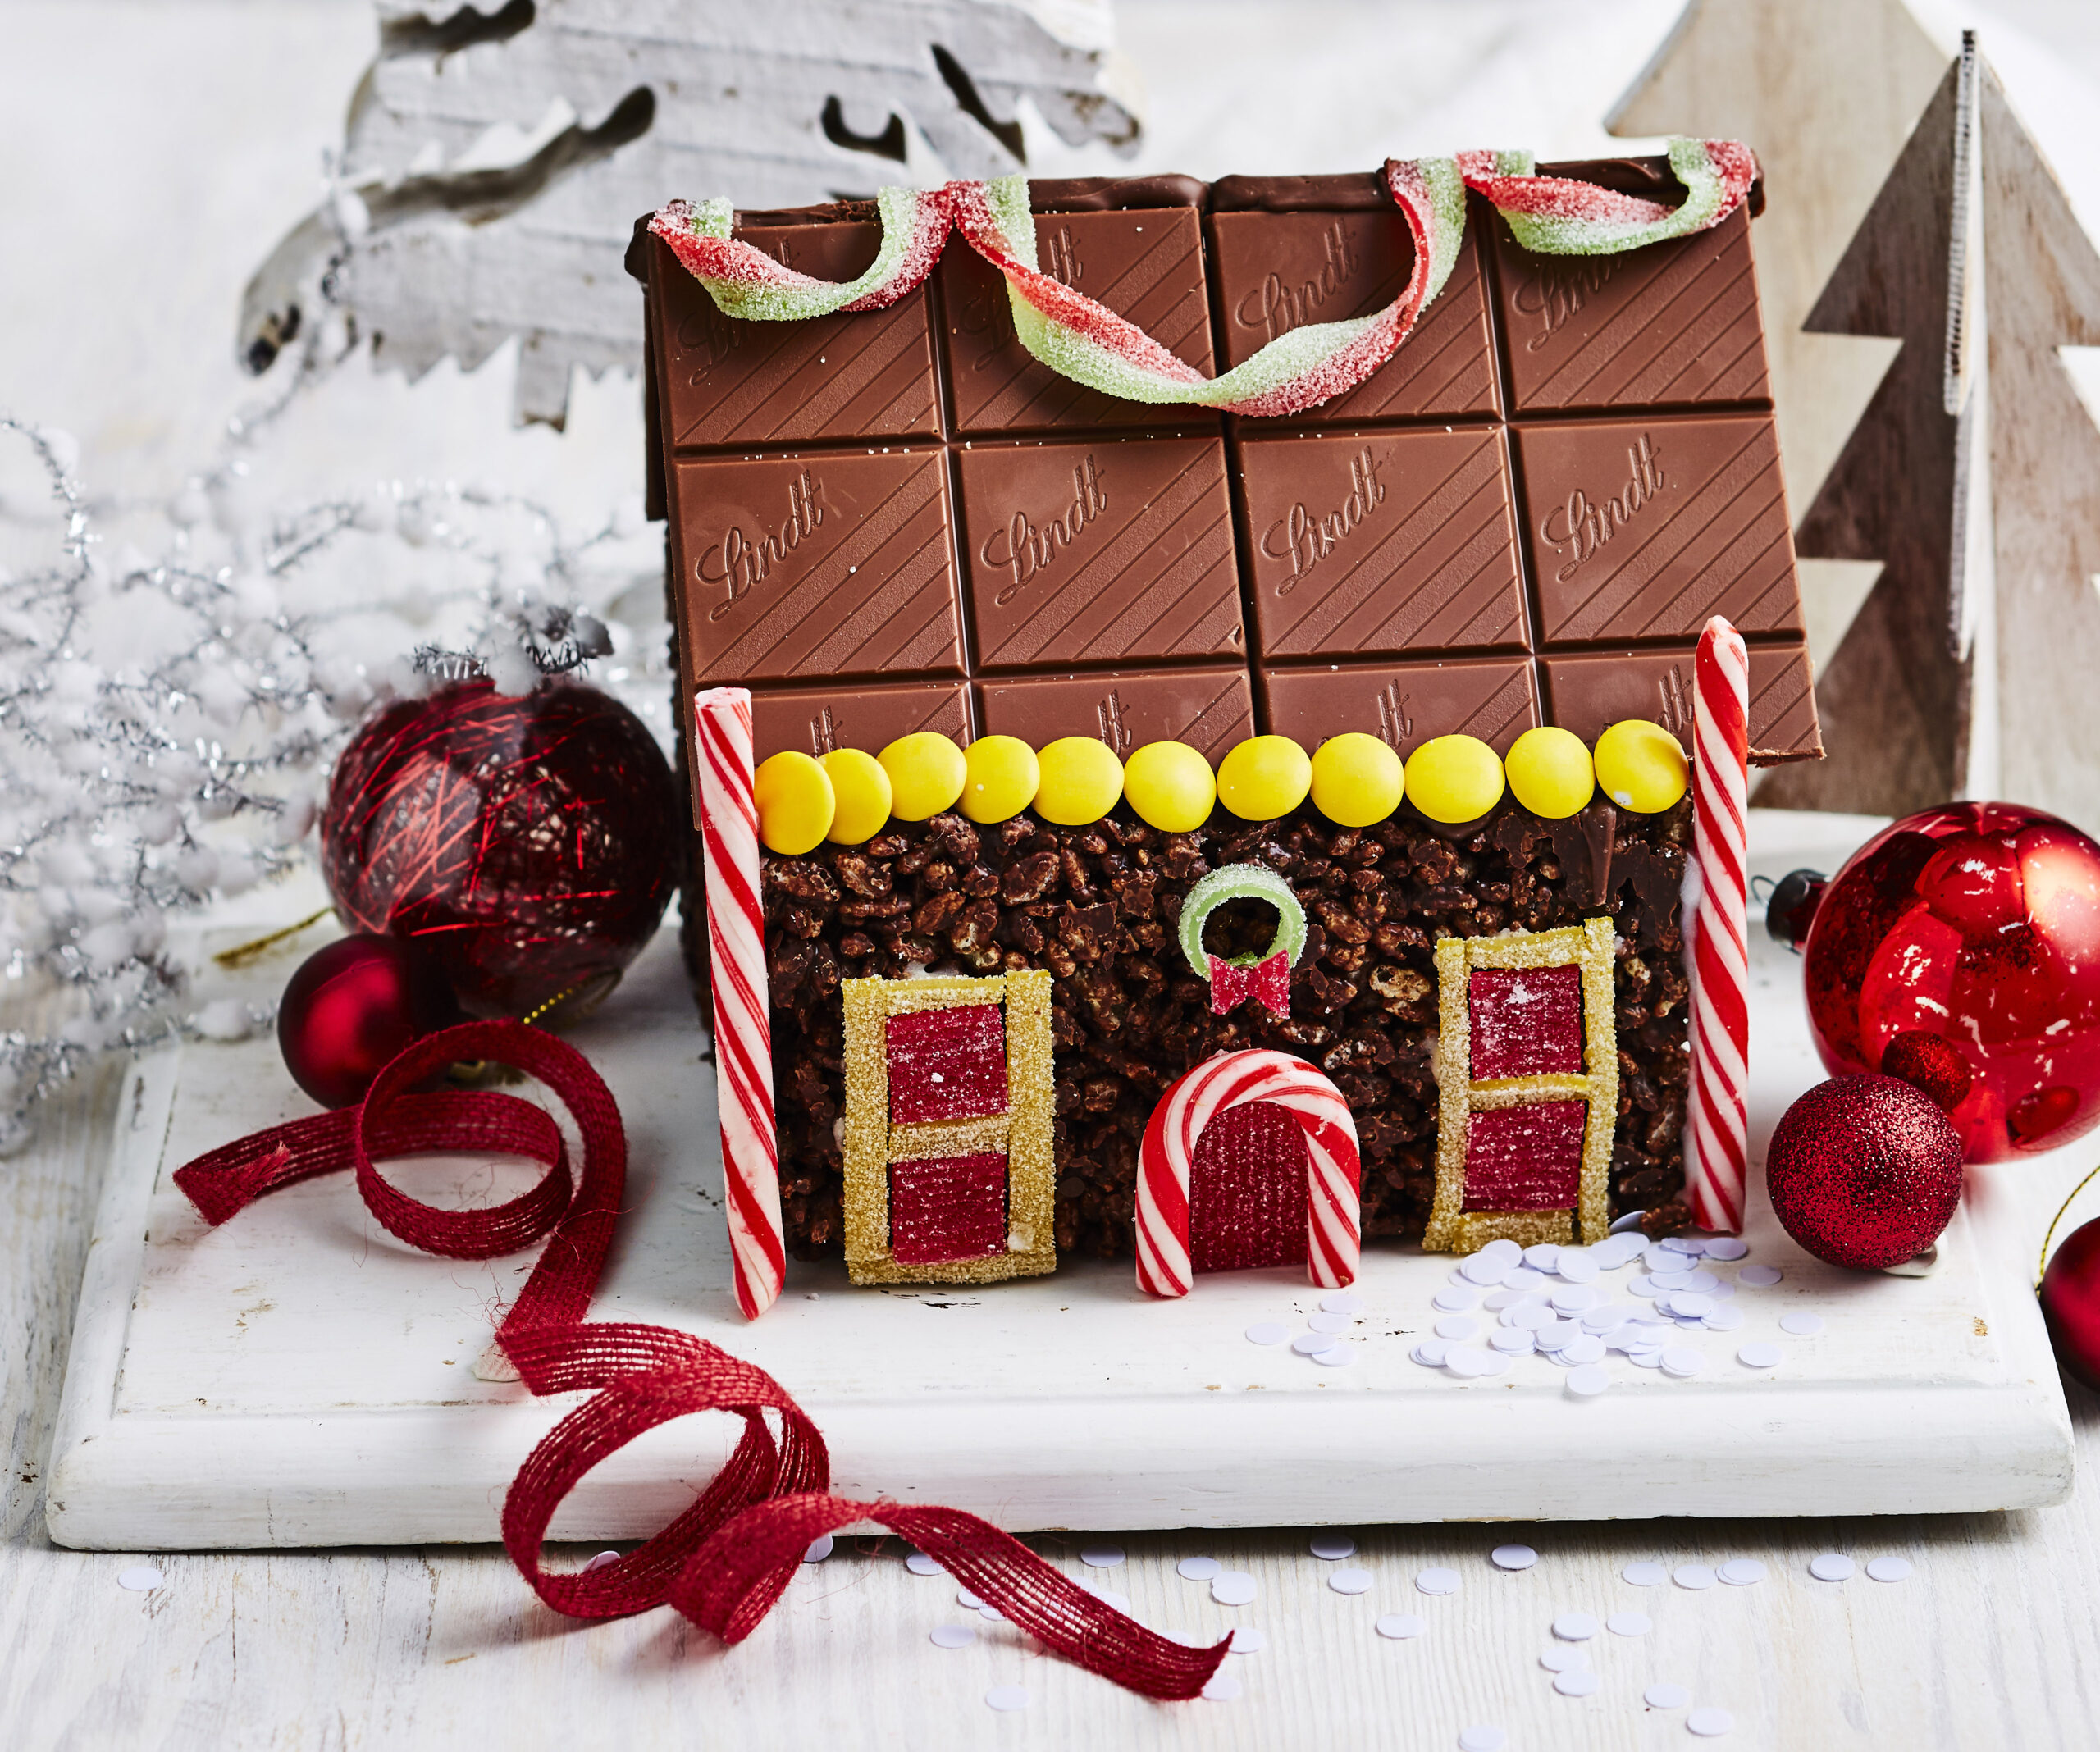 Four delicious Christmas cottage recipes